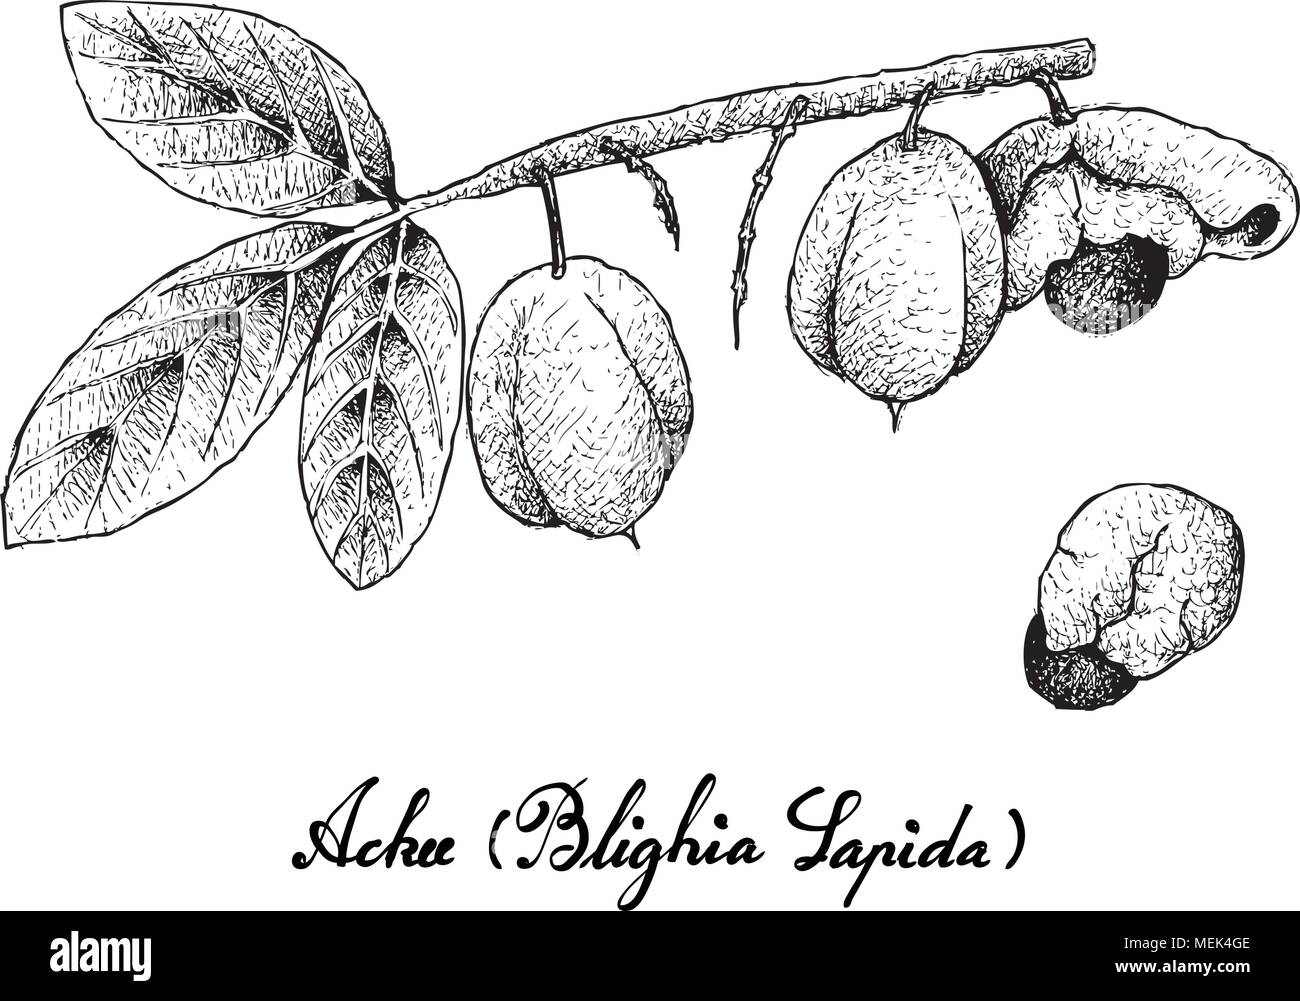 Tropical Fruits, Illustration Hand Drawn Sketch of Ackee or Blighia Sapida Fruits Isolated on A White Background. High in Vitamin A and C With Essenti Stock Vector